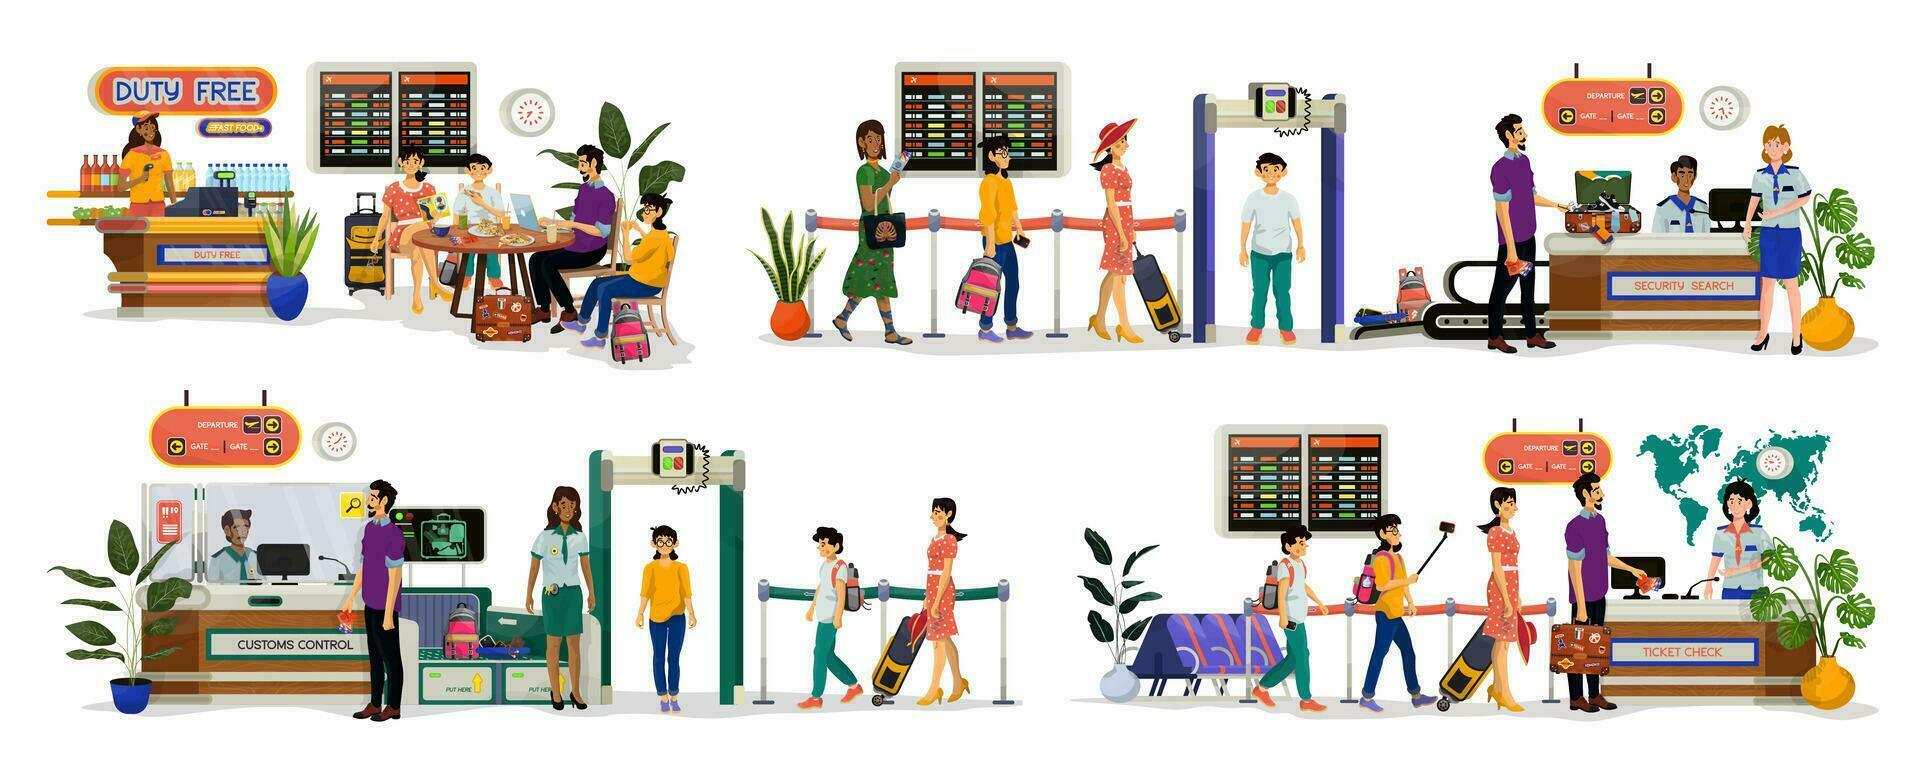 Collection of vector flat illustrations of duty free, security search, customs and ticket check.